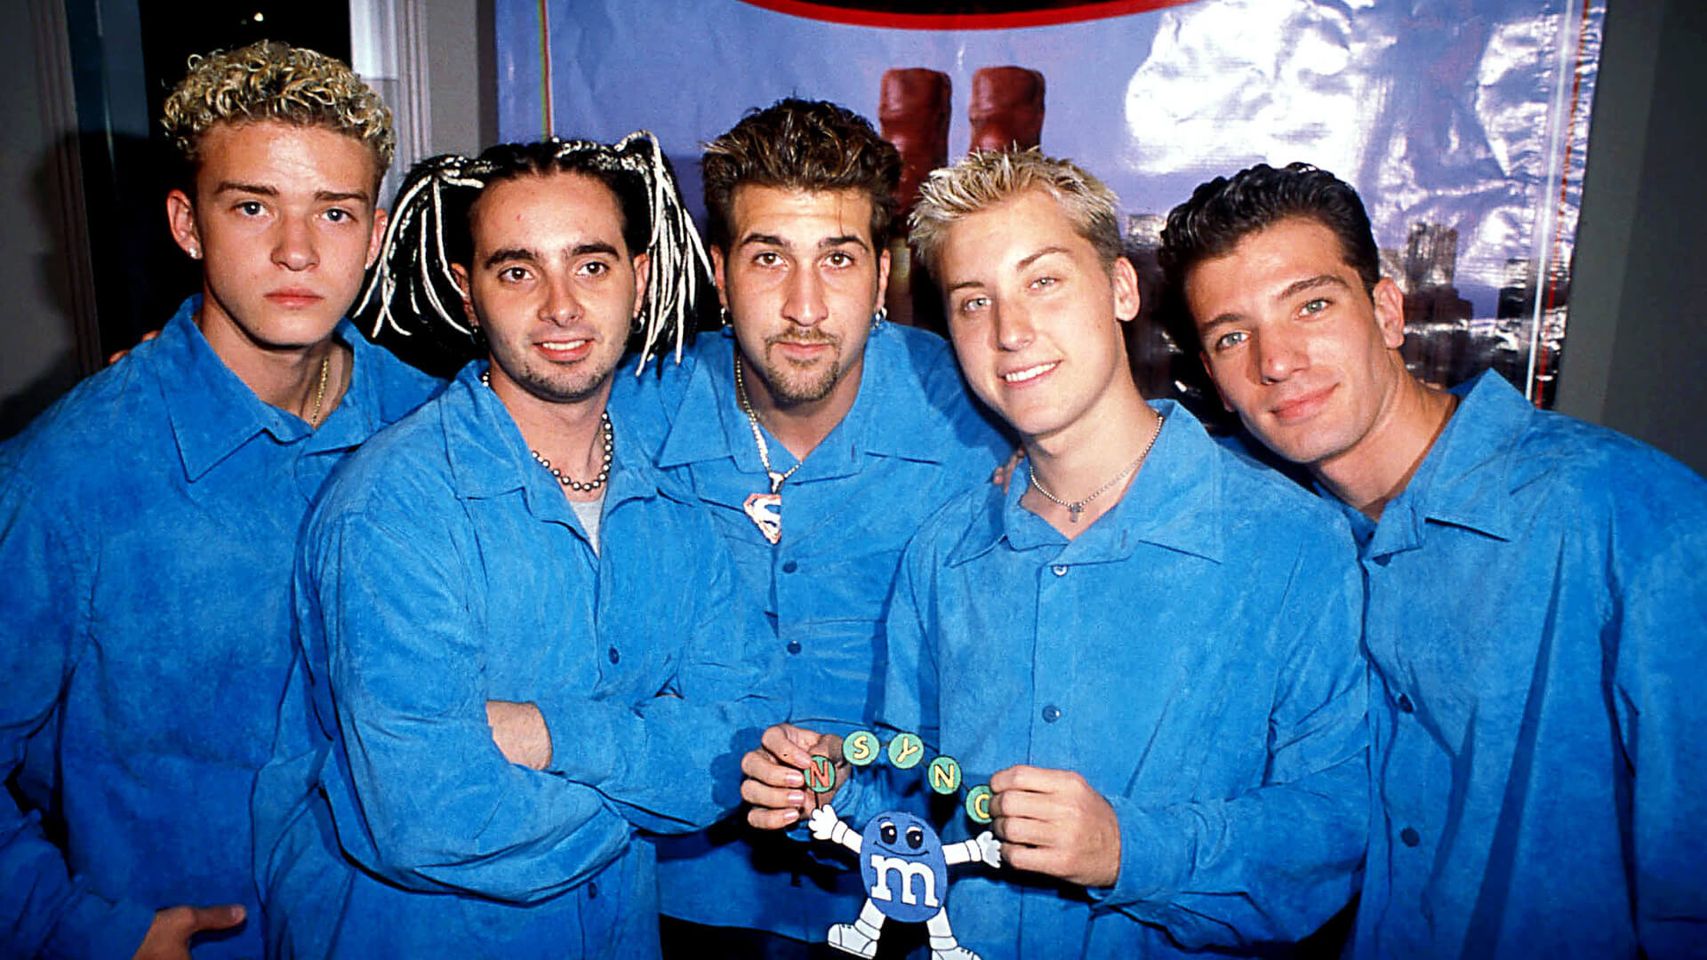 Five cheerful guys in identical blue t-shirts strike a fun pose, with one of them holding a tube of colorful M&Ms.